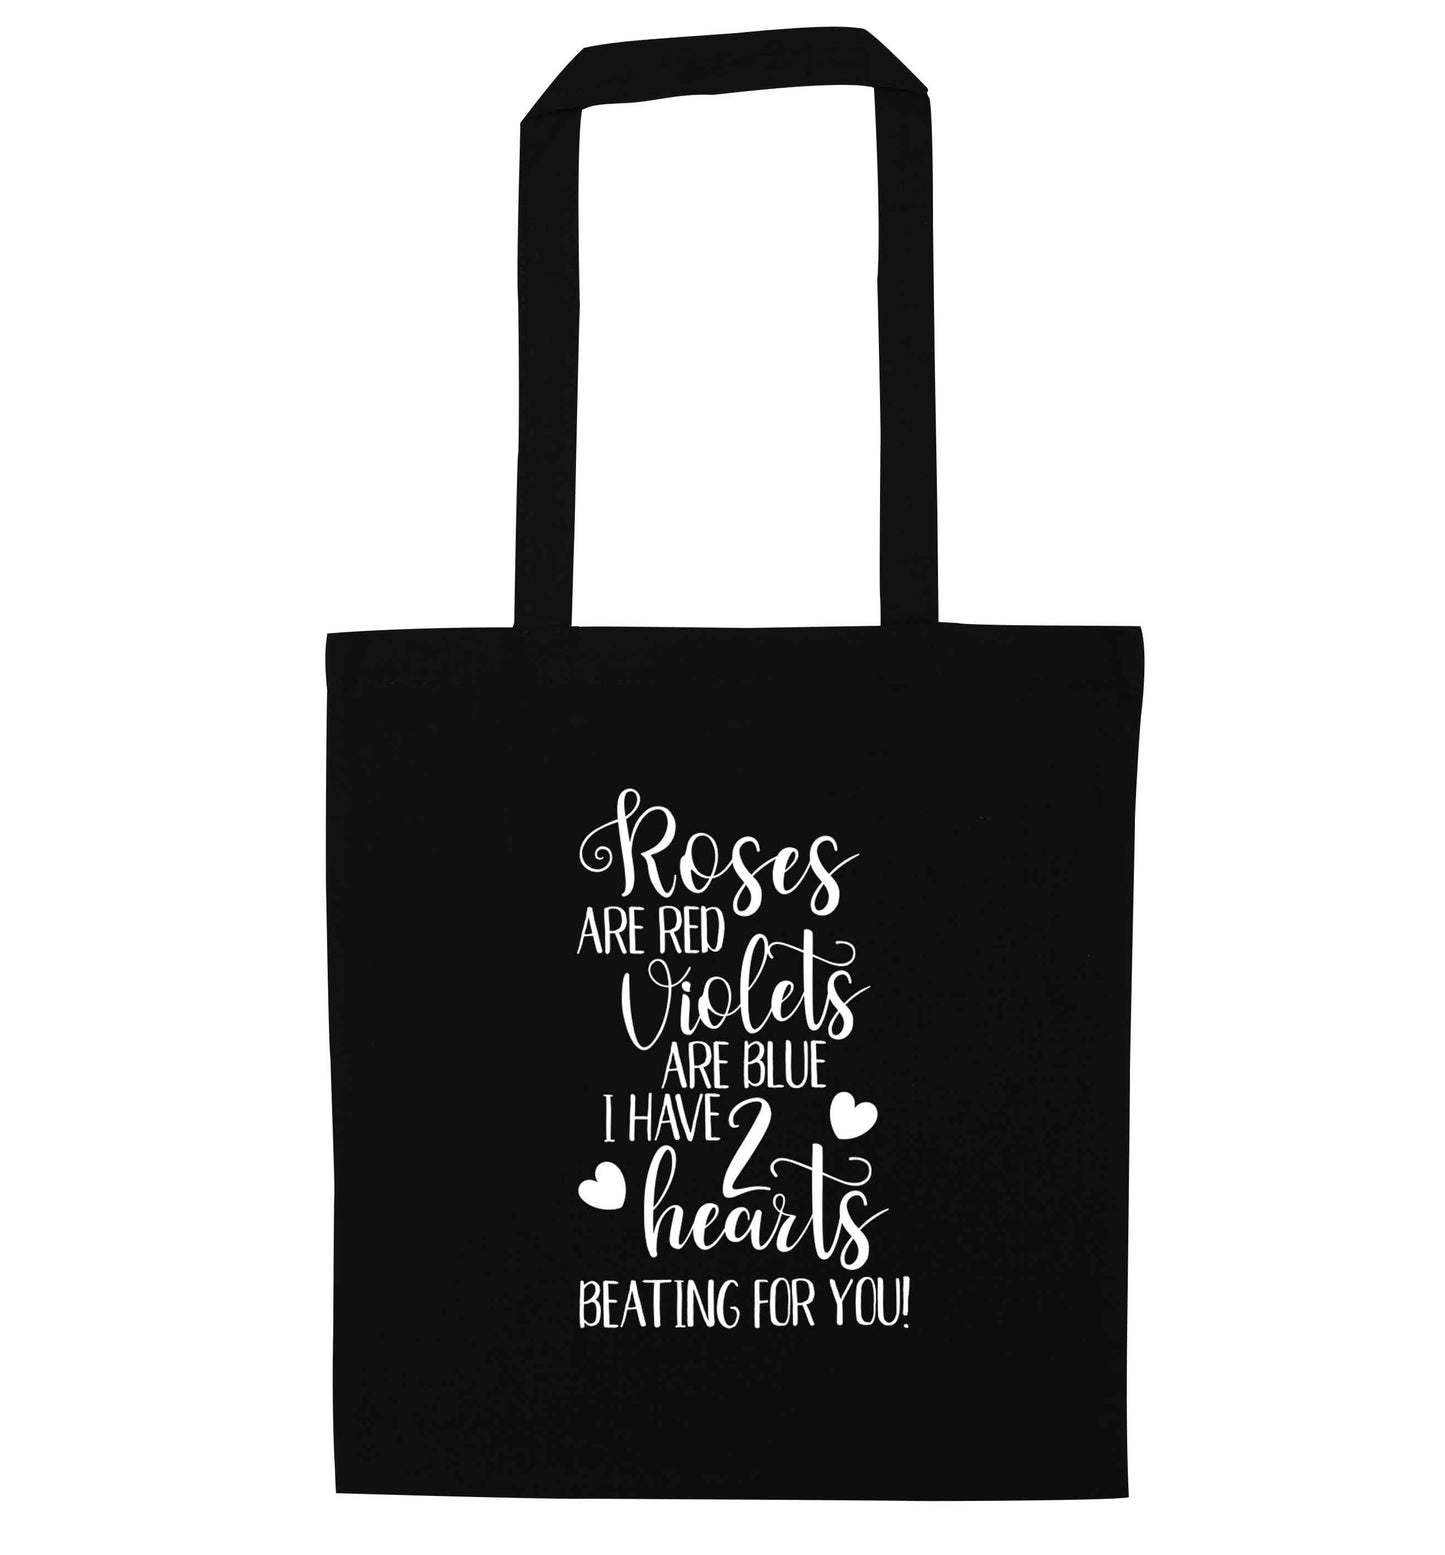 Roses are red violets are blue I have two hearts beating for you black tote bag